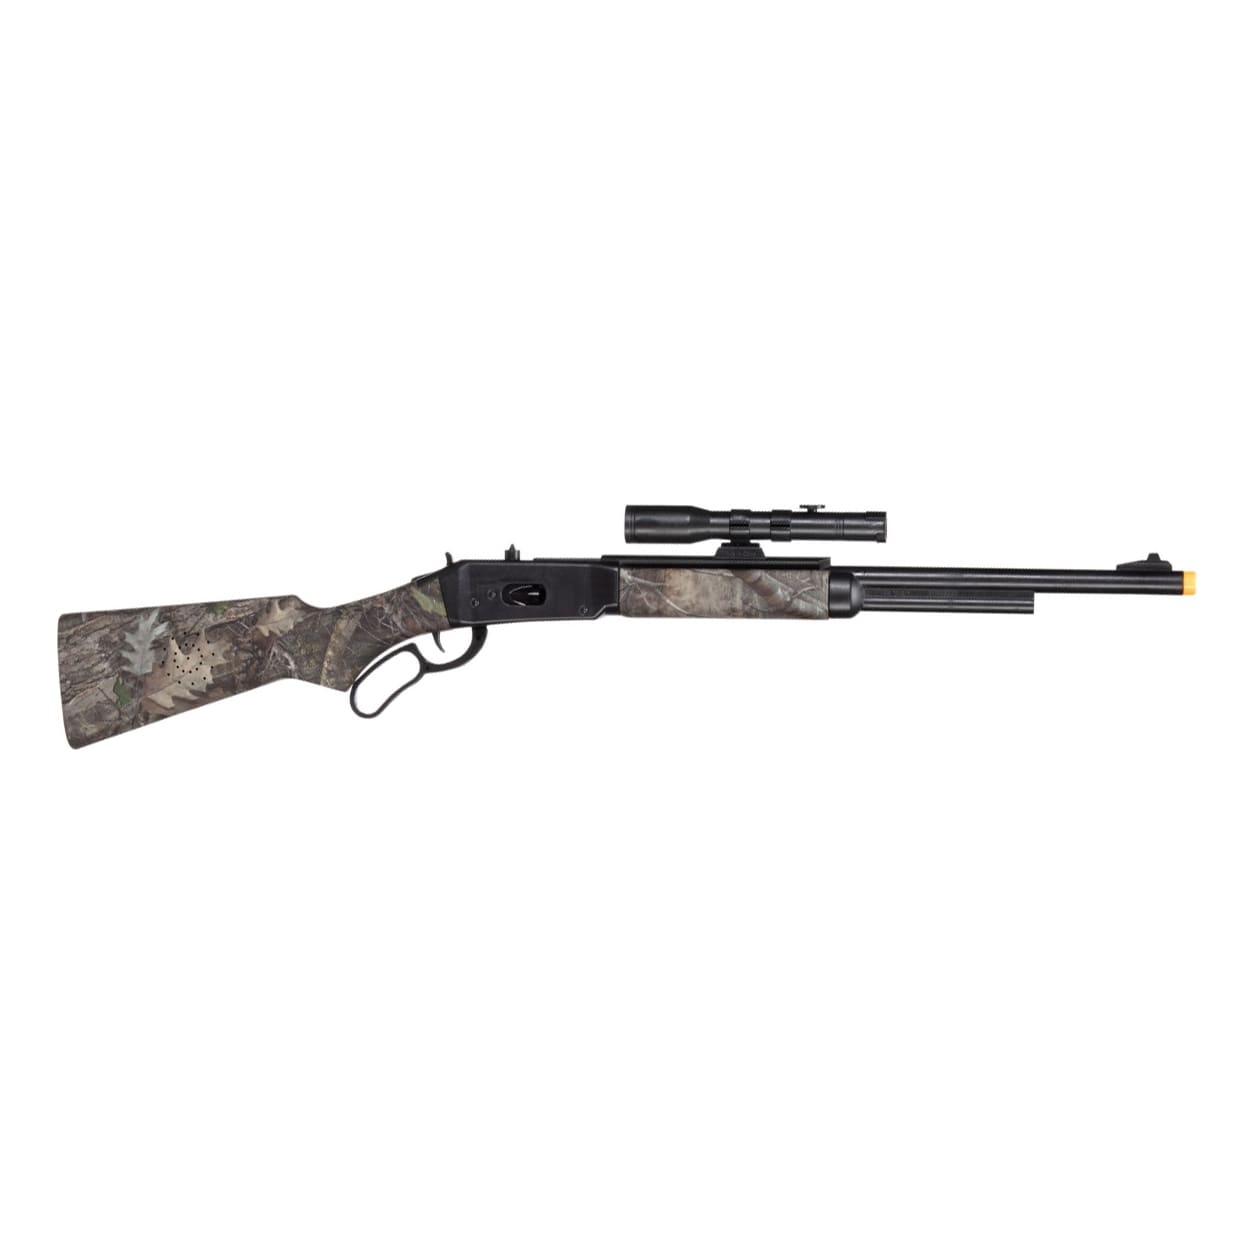 Cabela's Timber Scout Toy Rifle for Kids